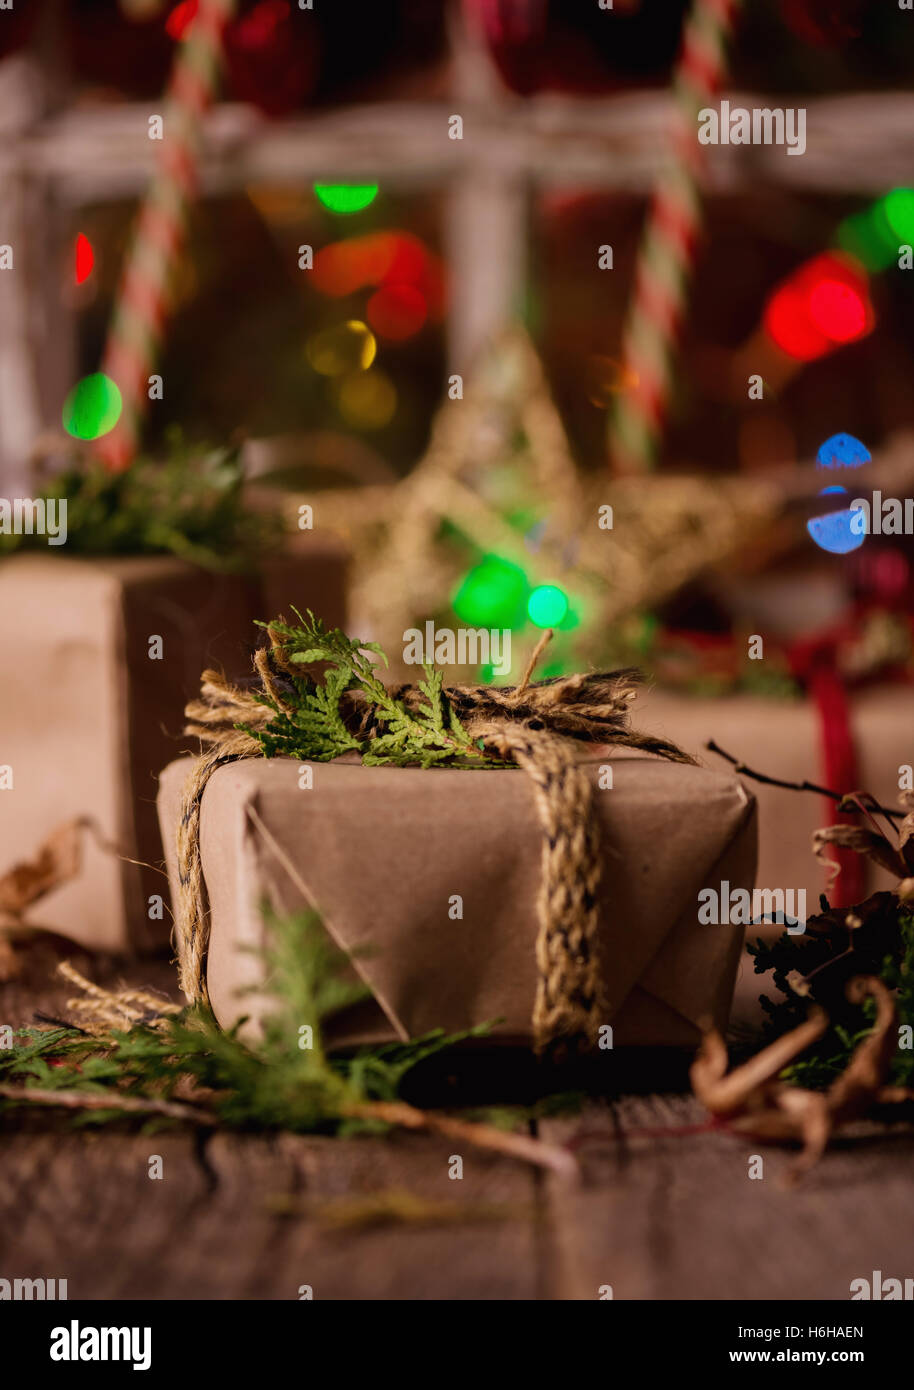 Rustic wrapped Christmas gifts agains window with lights Stock Photo